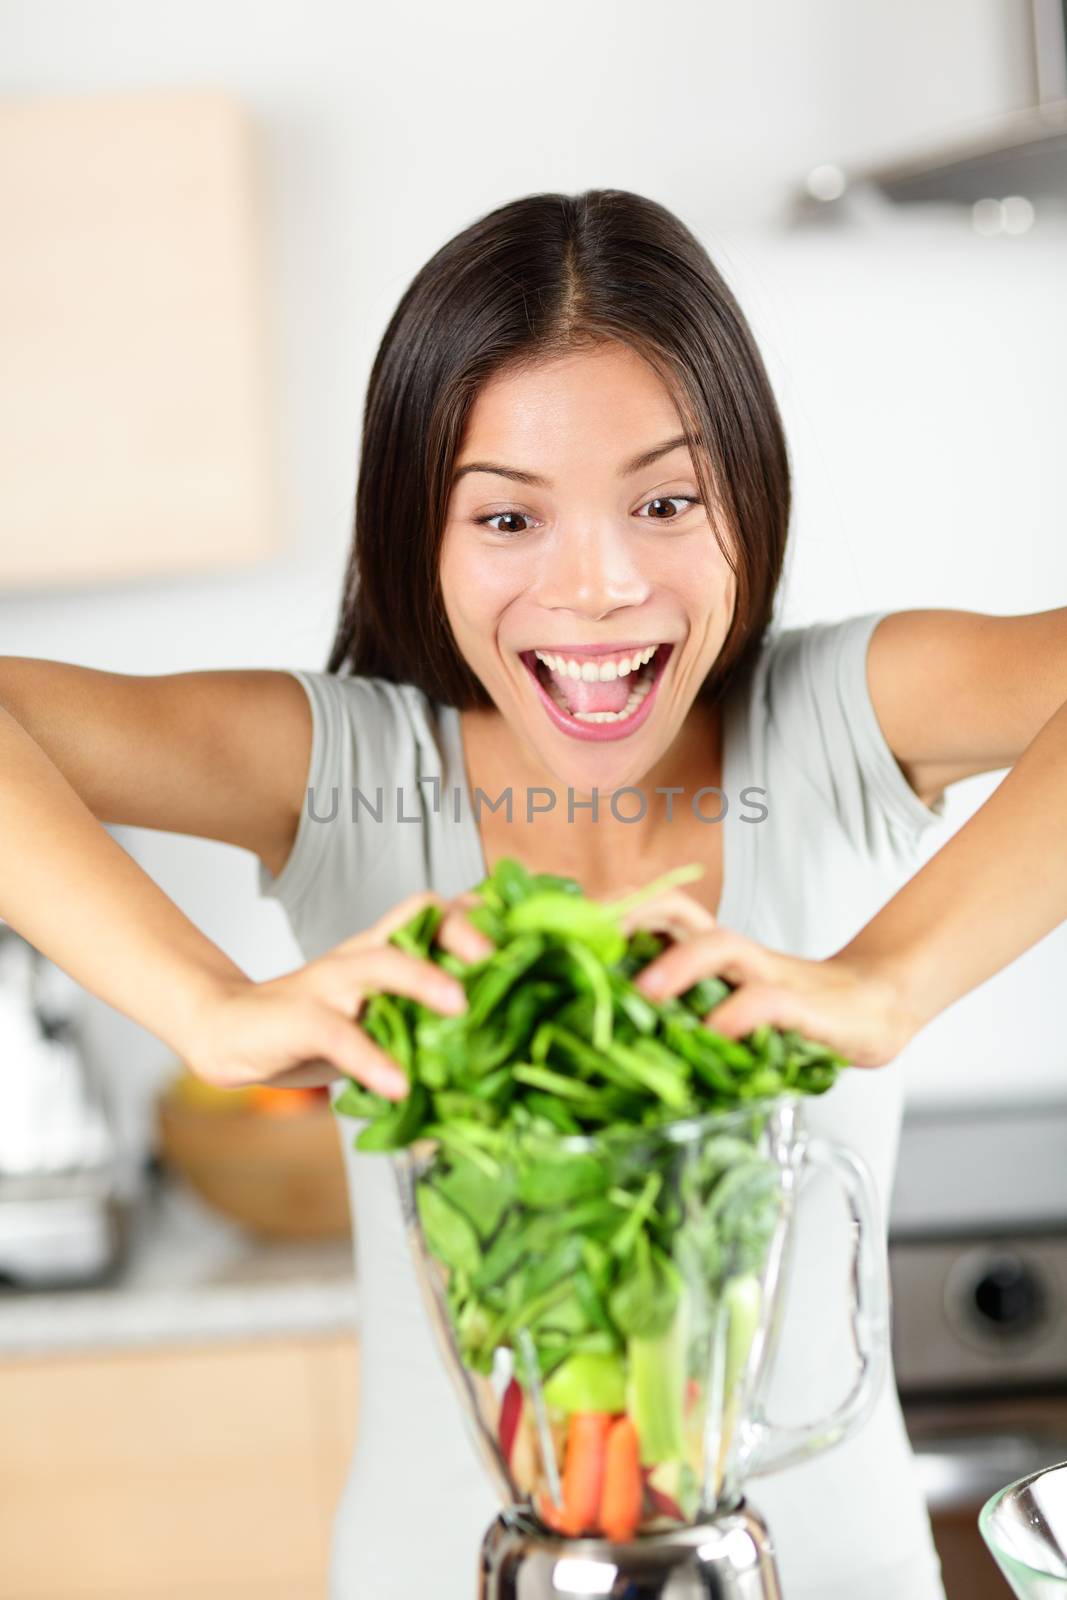 Vegetable smoothie woman making green smoothies with blender home in kitchen. Funny healthy raw eating lifestyle concept portrait of beautiful young woman preparing drink with spinach, carrots